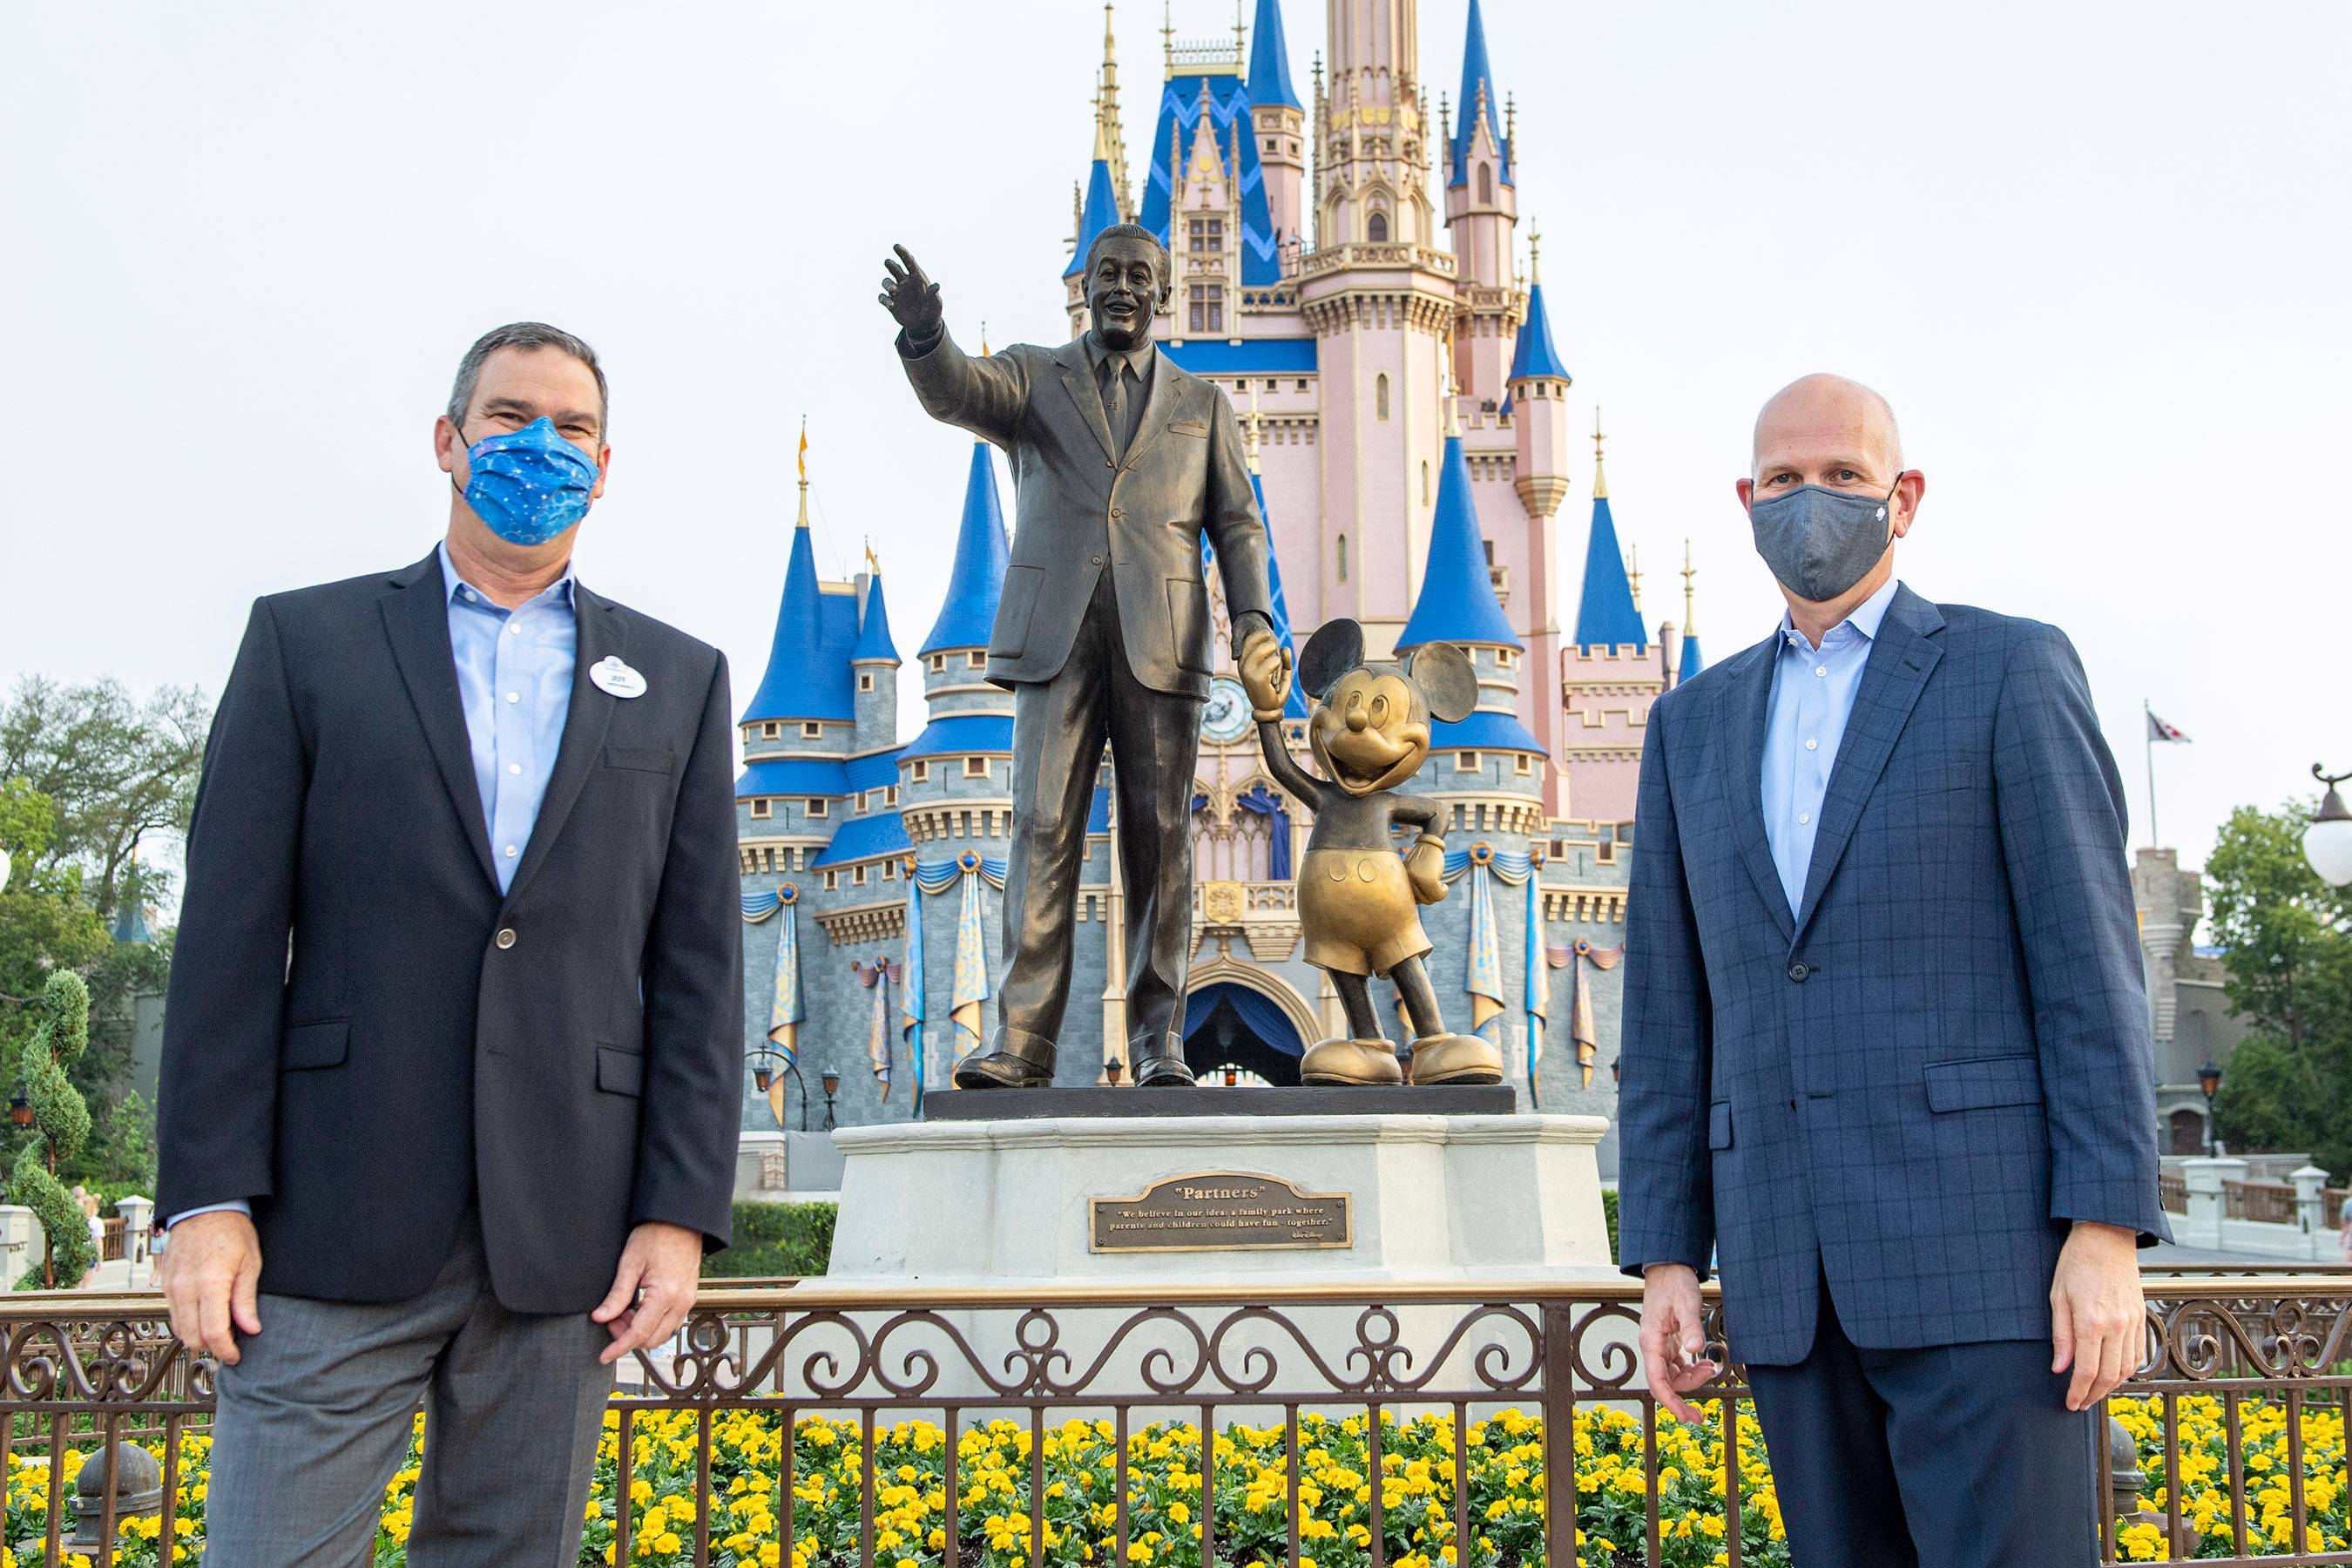 Disney expands its partnership with AdventHealth as it becomes the Official Health Care Provider at Walt Disney World Resort